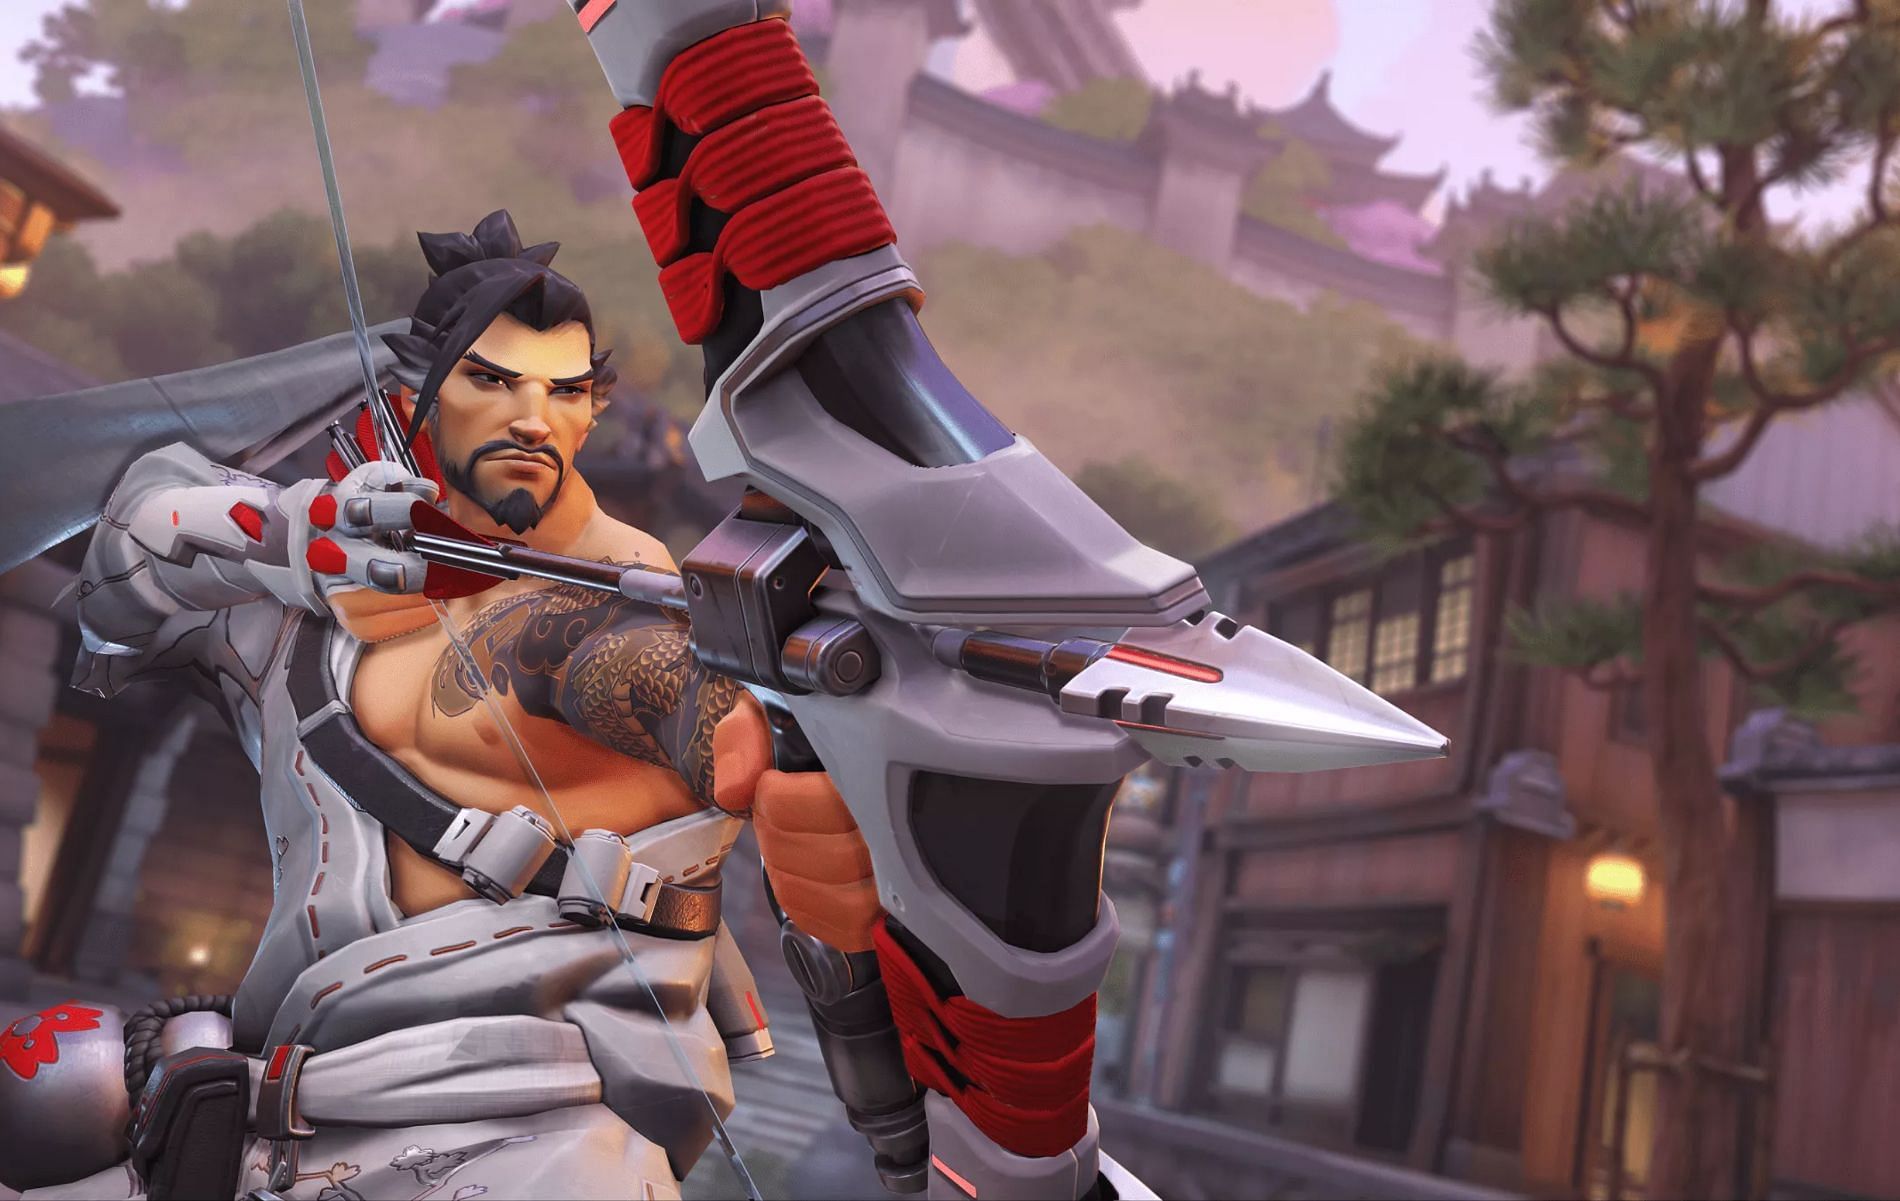 Hanzo is an Assassin who carries a lethal composite bow (Image via Blizzard Entertainment)